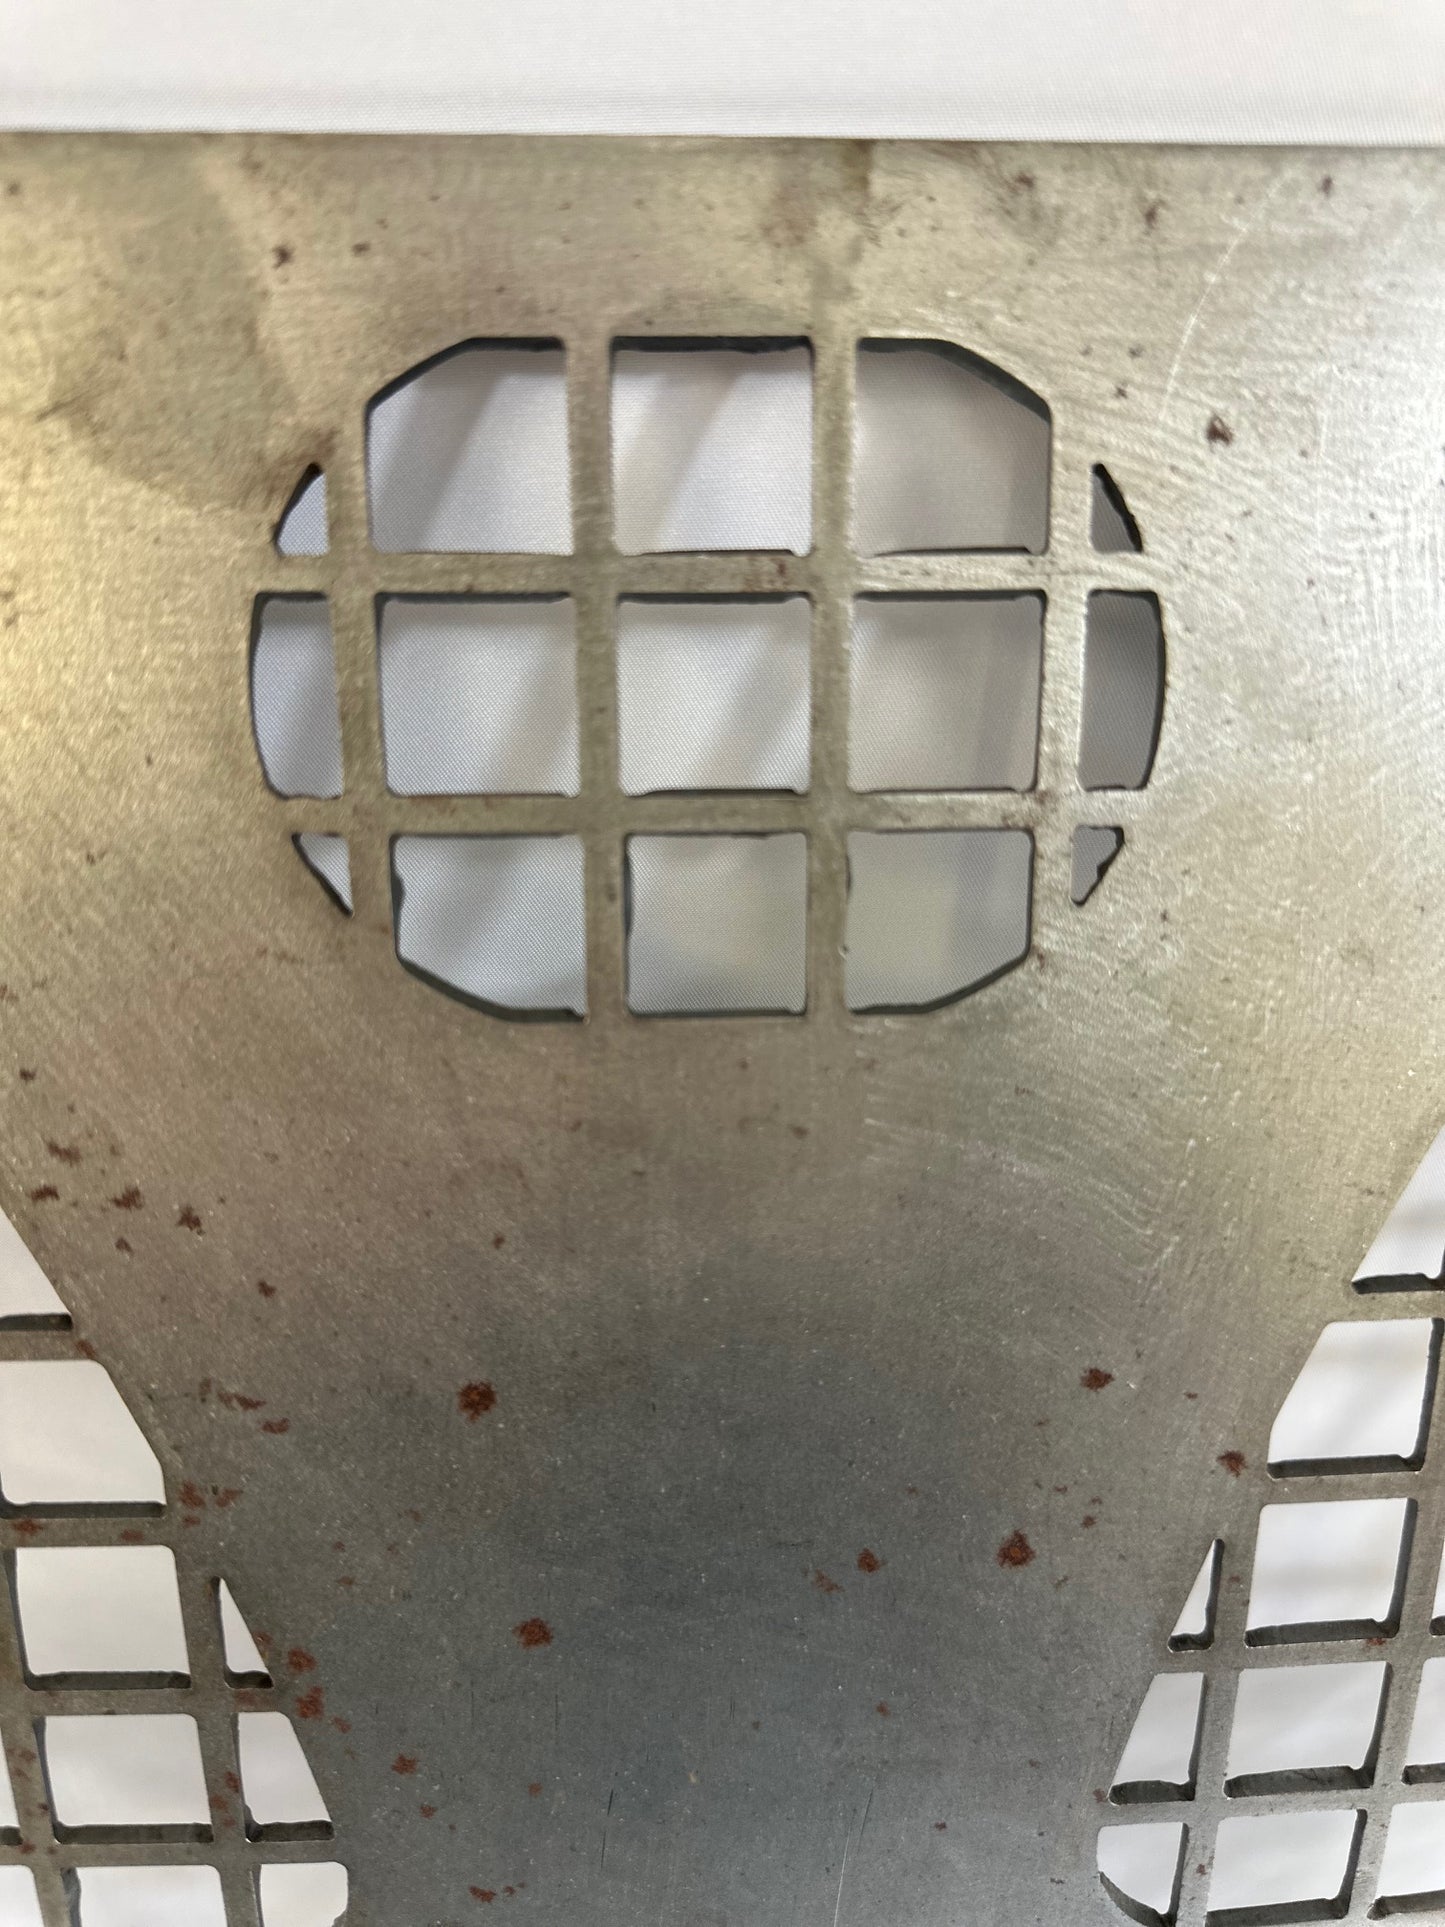 IN STOCK - BLEMISHED - Ready to be Powder Coated M6060 Grille Guard